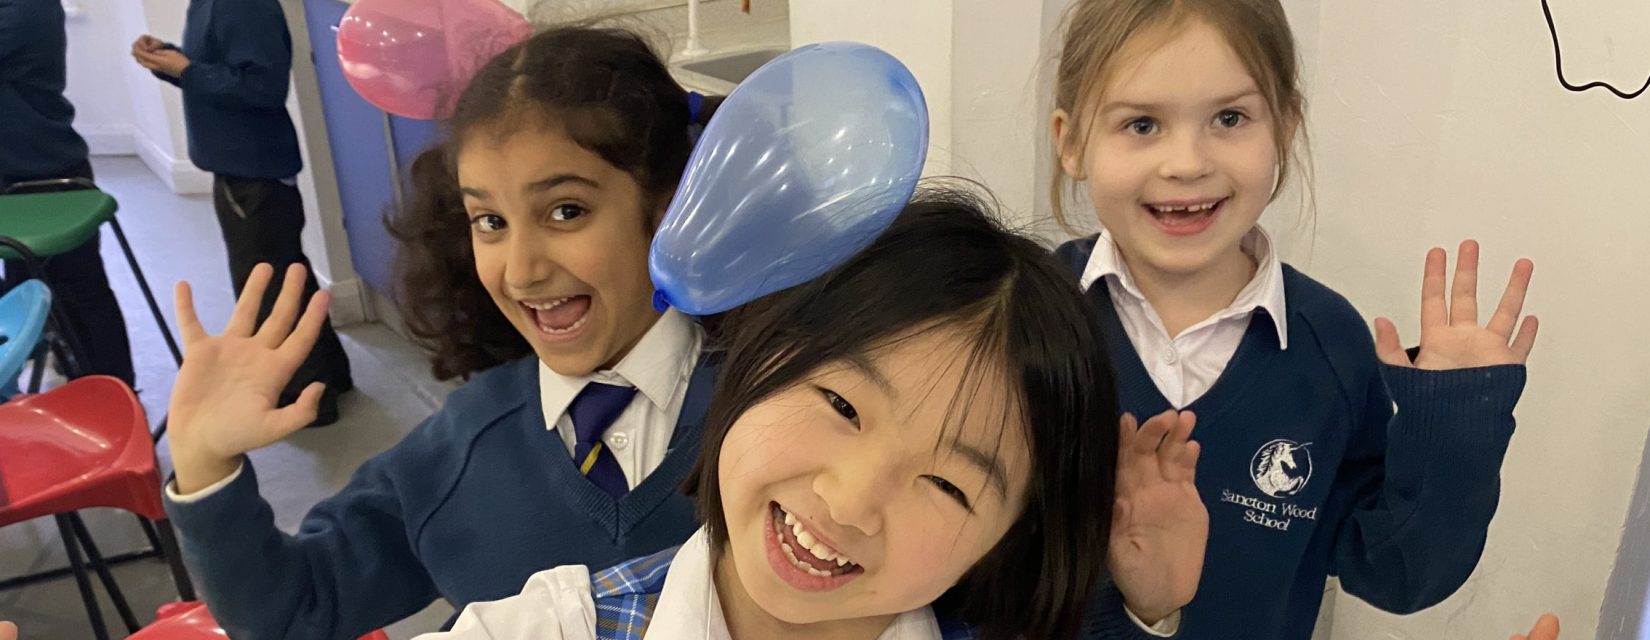 children with static balloons on their hair